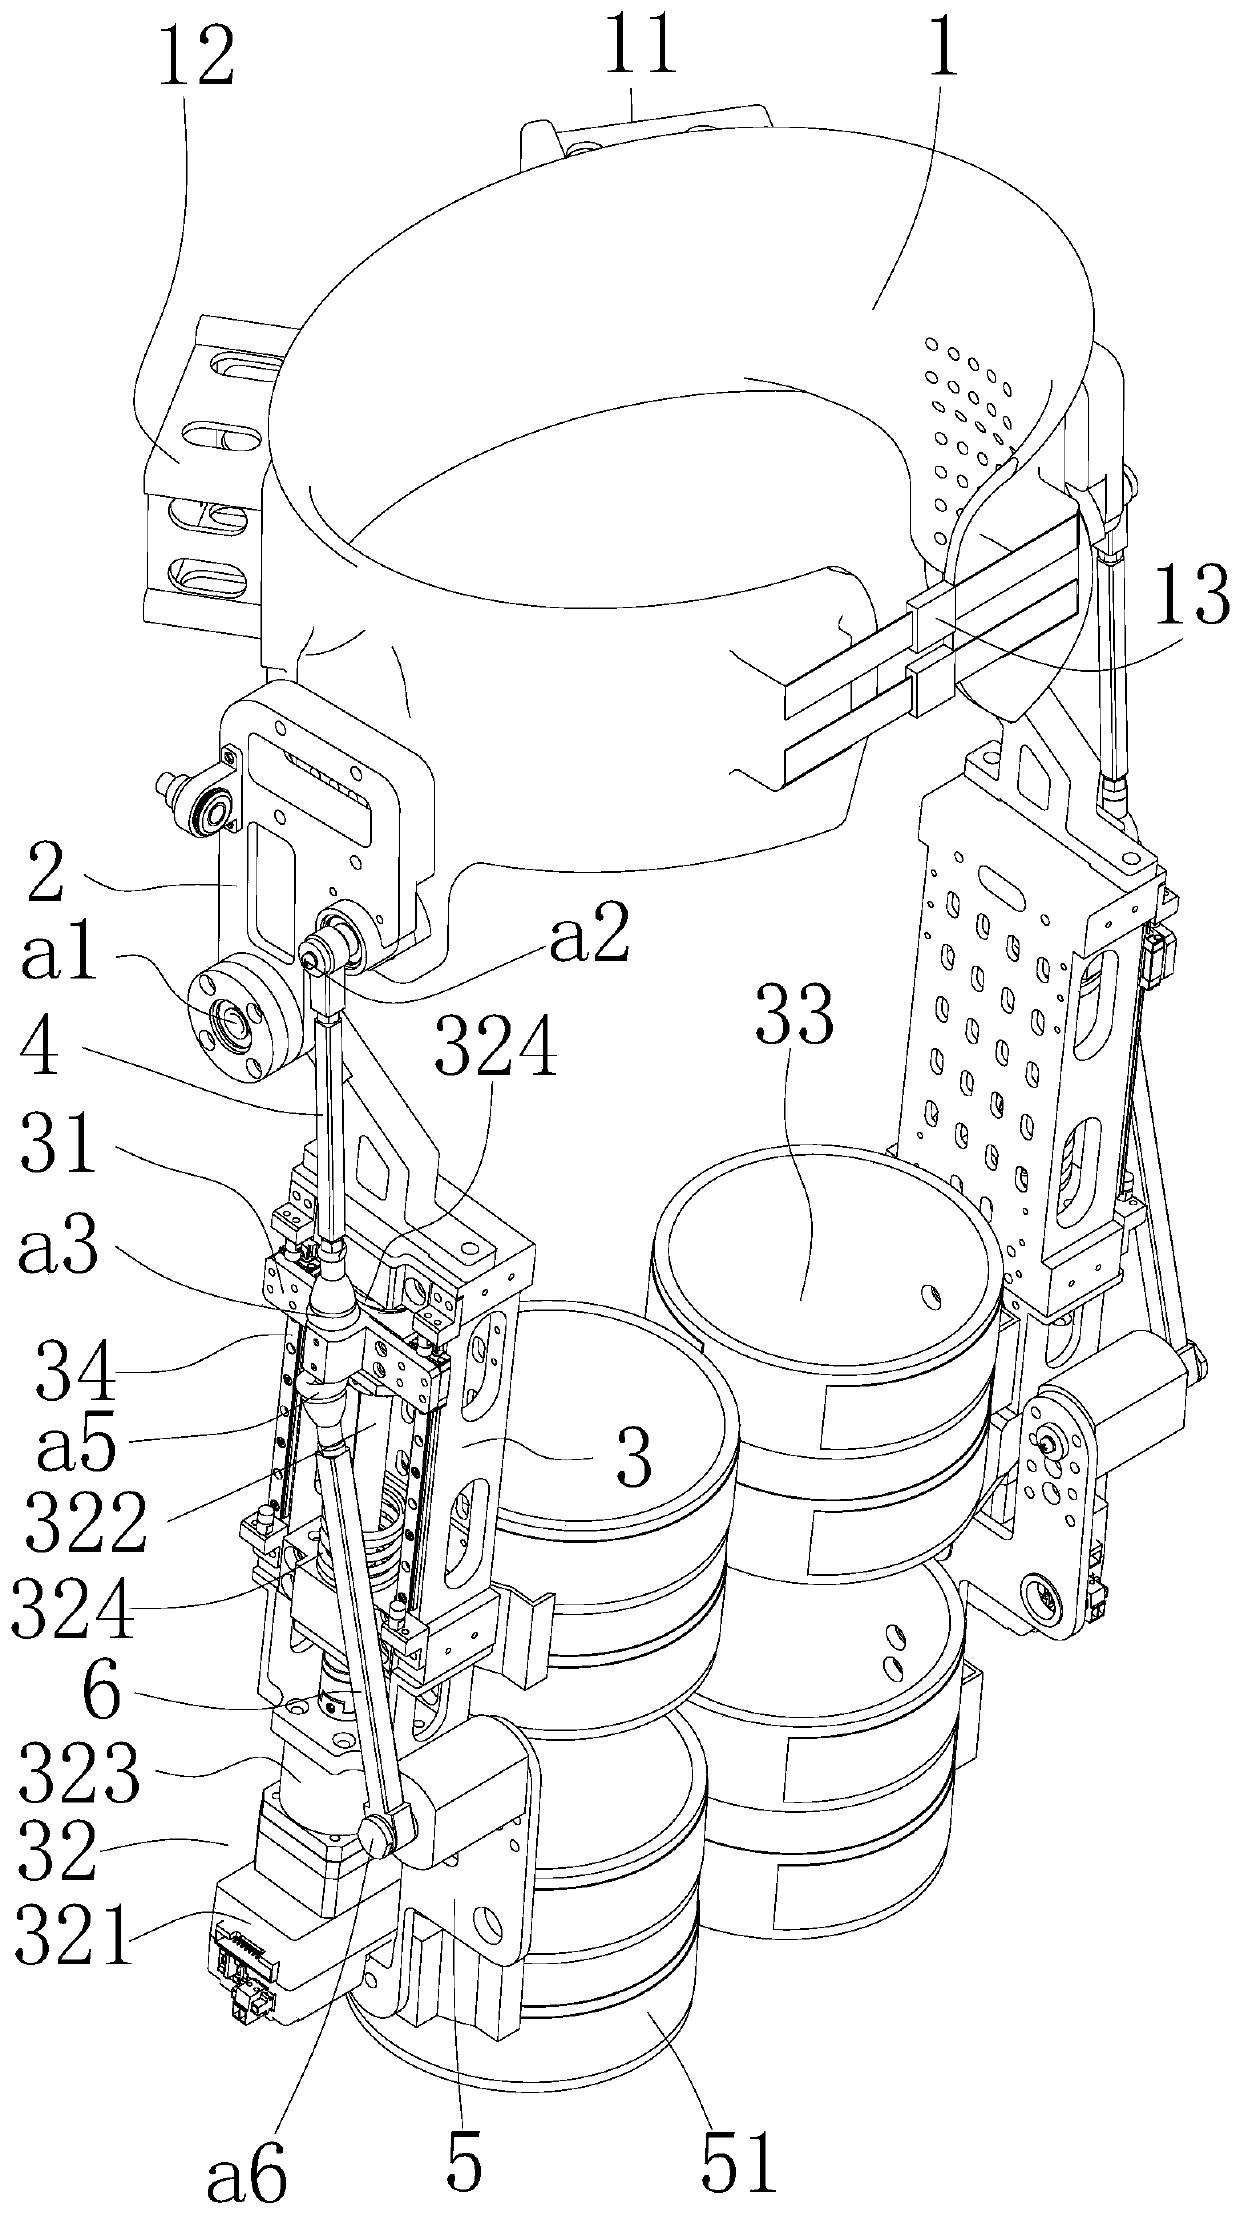 Wearable assistance device for hip joints and knee joints of lower limbs